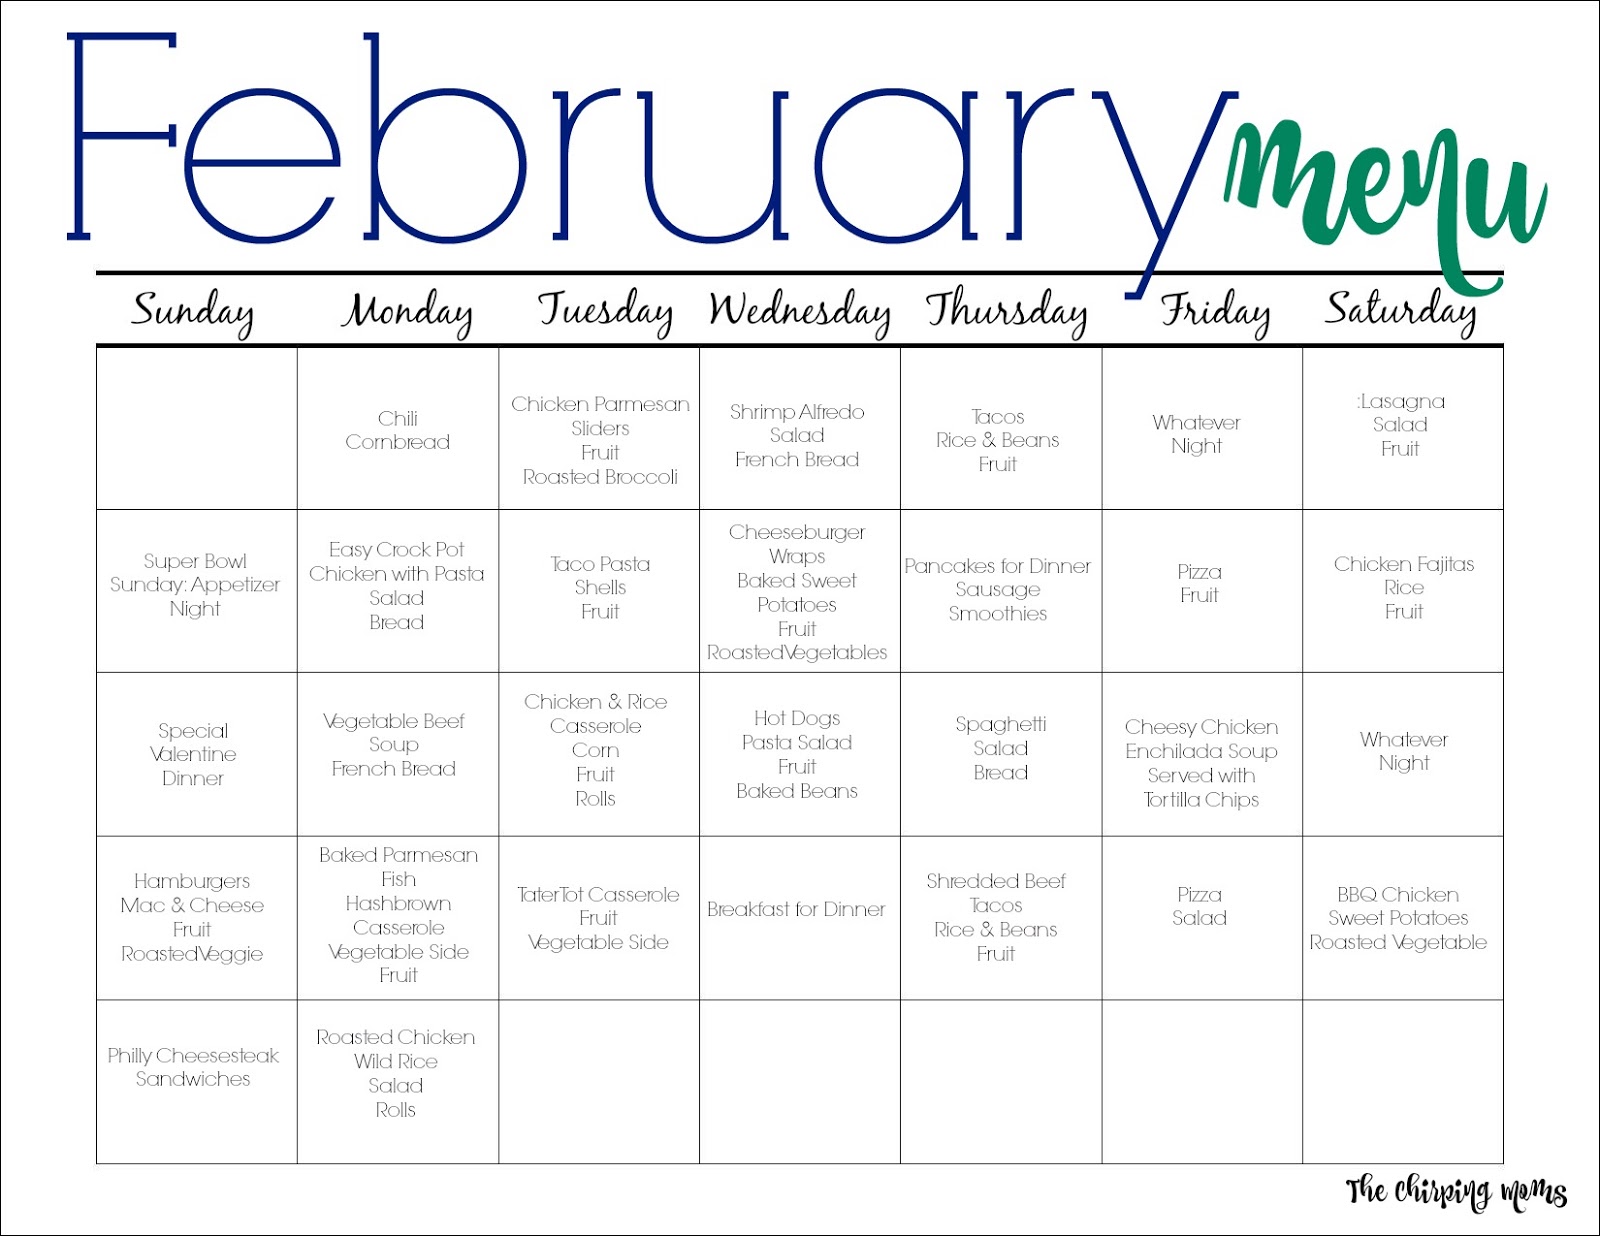 February Meal Plan for Families (Free Printable) - The Chirping Moms